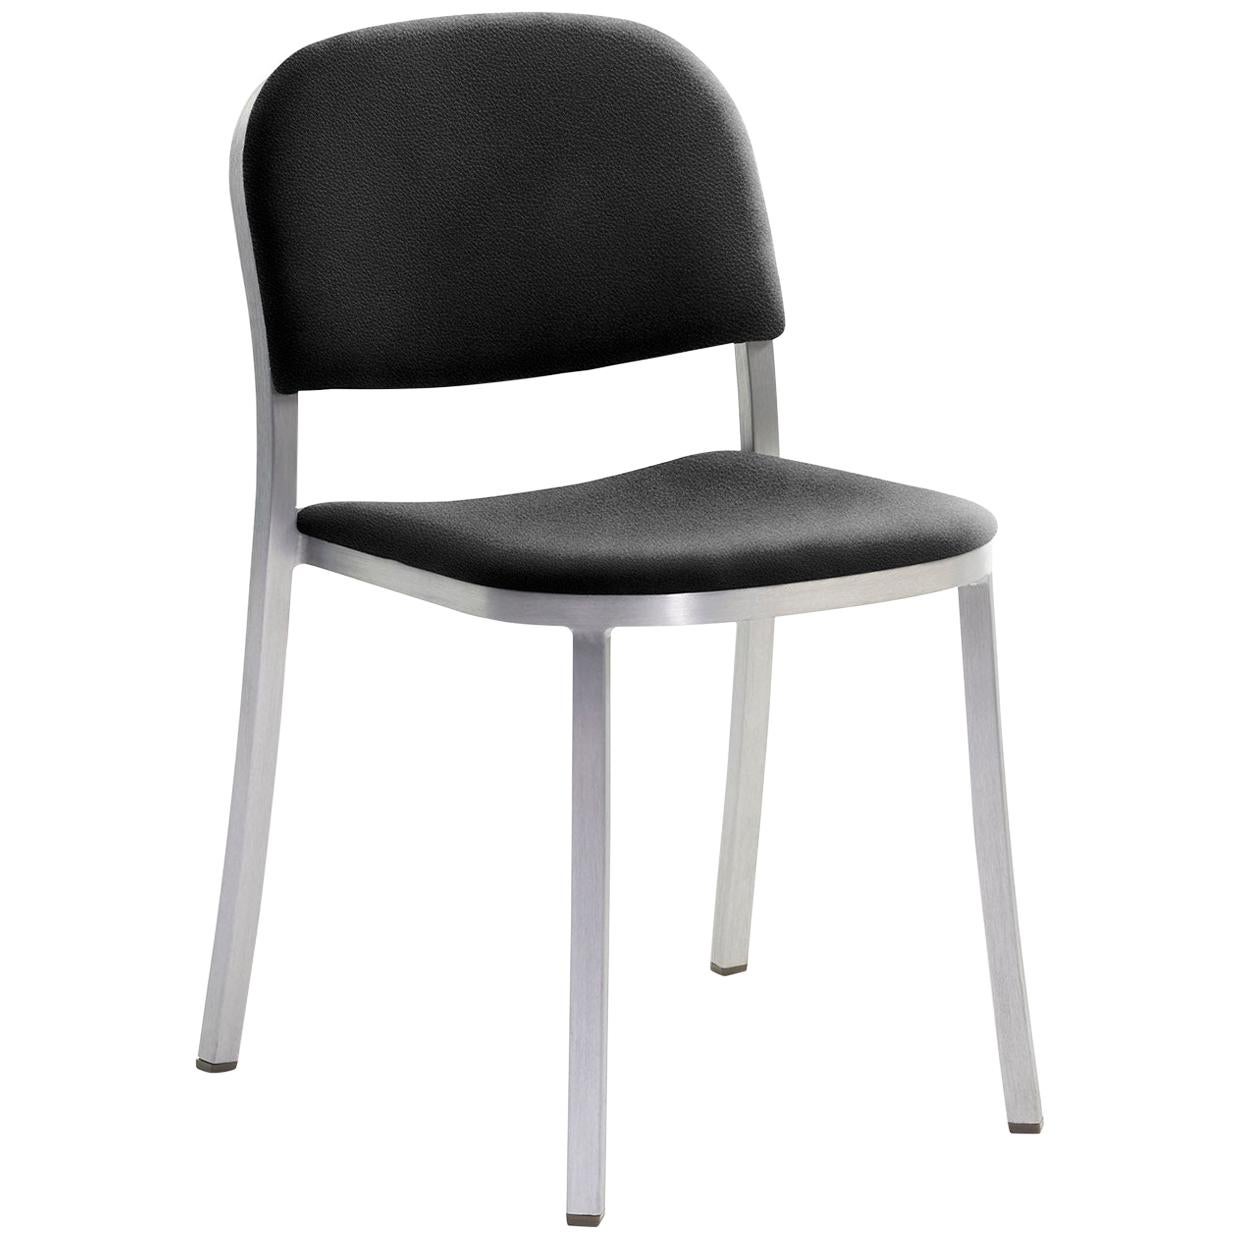 Emeco 1 Inch Stacking Chair with Aluminum Legs & Black Fabric by Jasper Morrison